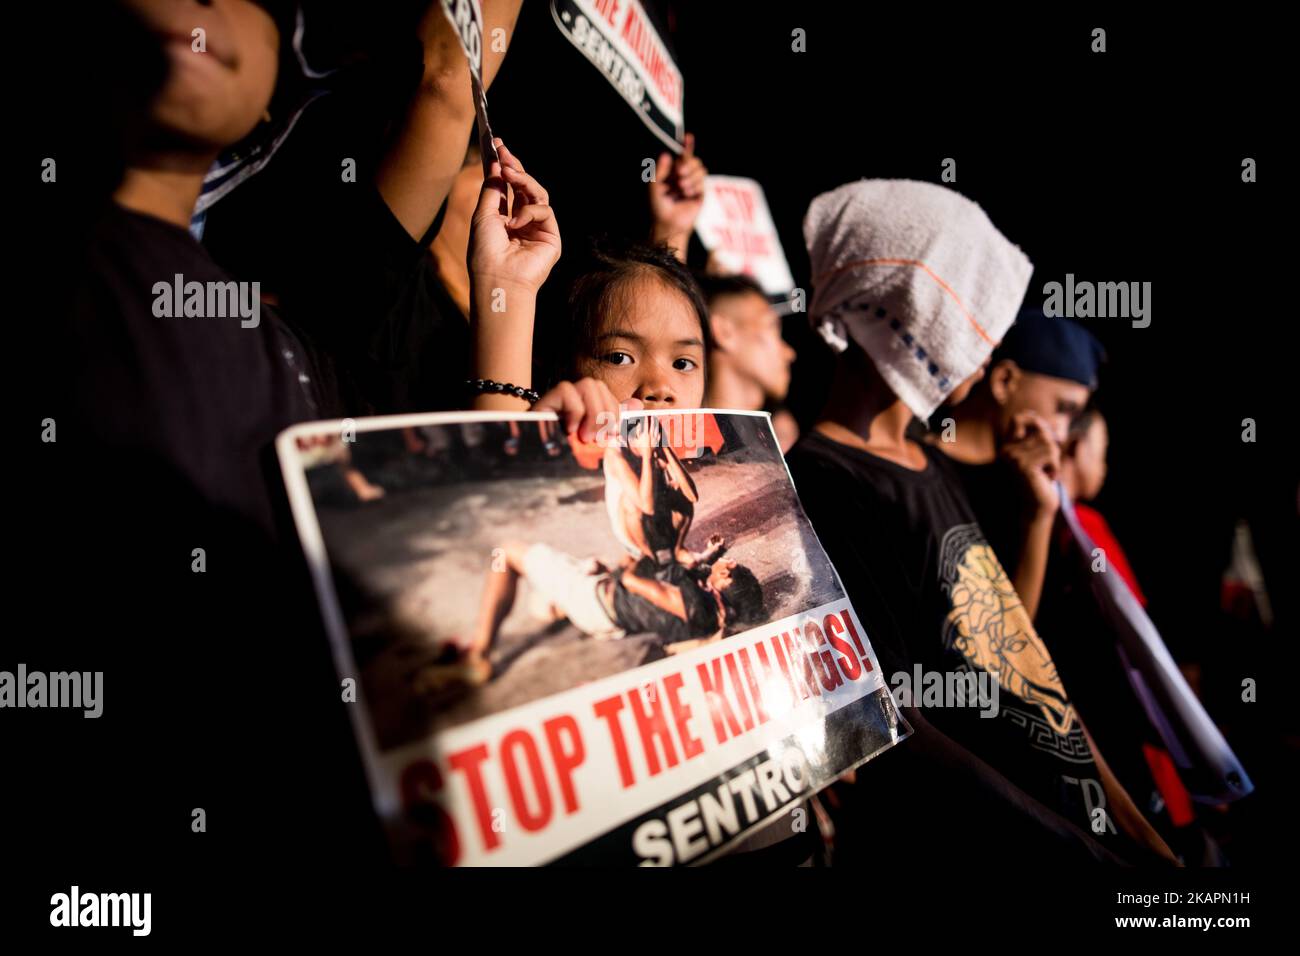 Protesters hold placards and slogans during a rally against extrajudicial killings in EDSA Shrine, Ortigas, Pasig City, Philippines on Monday, 21 August 2017. The death of Kian Delos Santos, who was killed by policemen in an alleged shootout, has sparked outrage among citizens related to the government's Philippine anti-drug operation. (Photo by Richard Atrero de Guzman/NurPhoto) Stock Photo